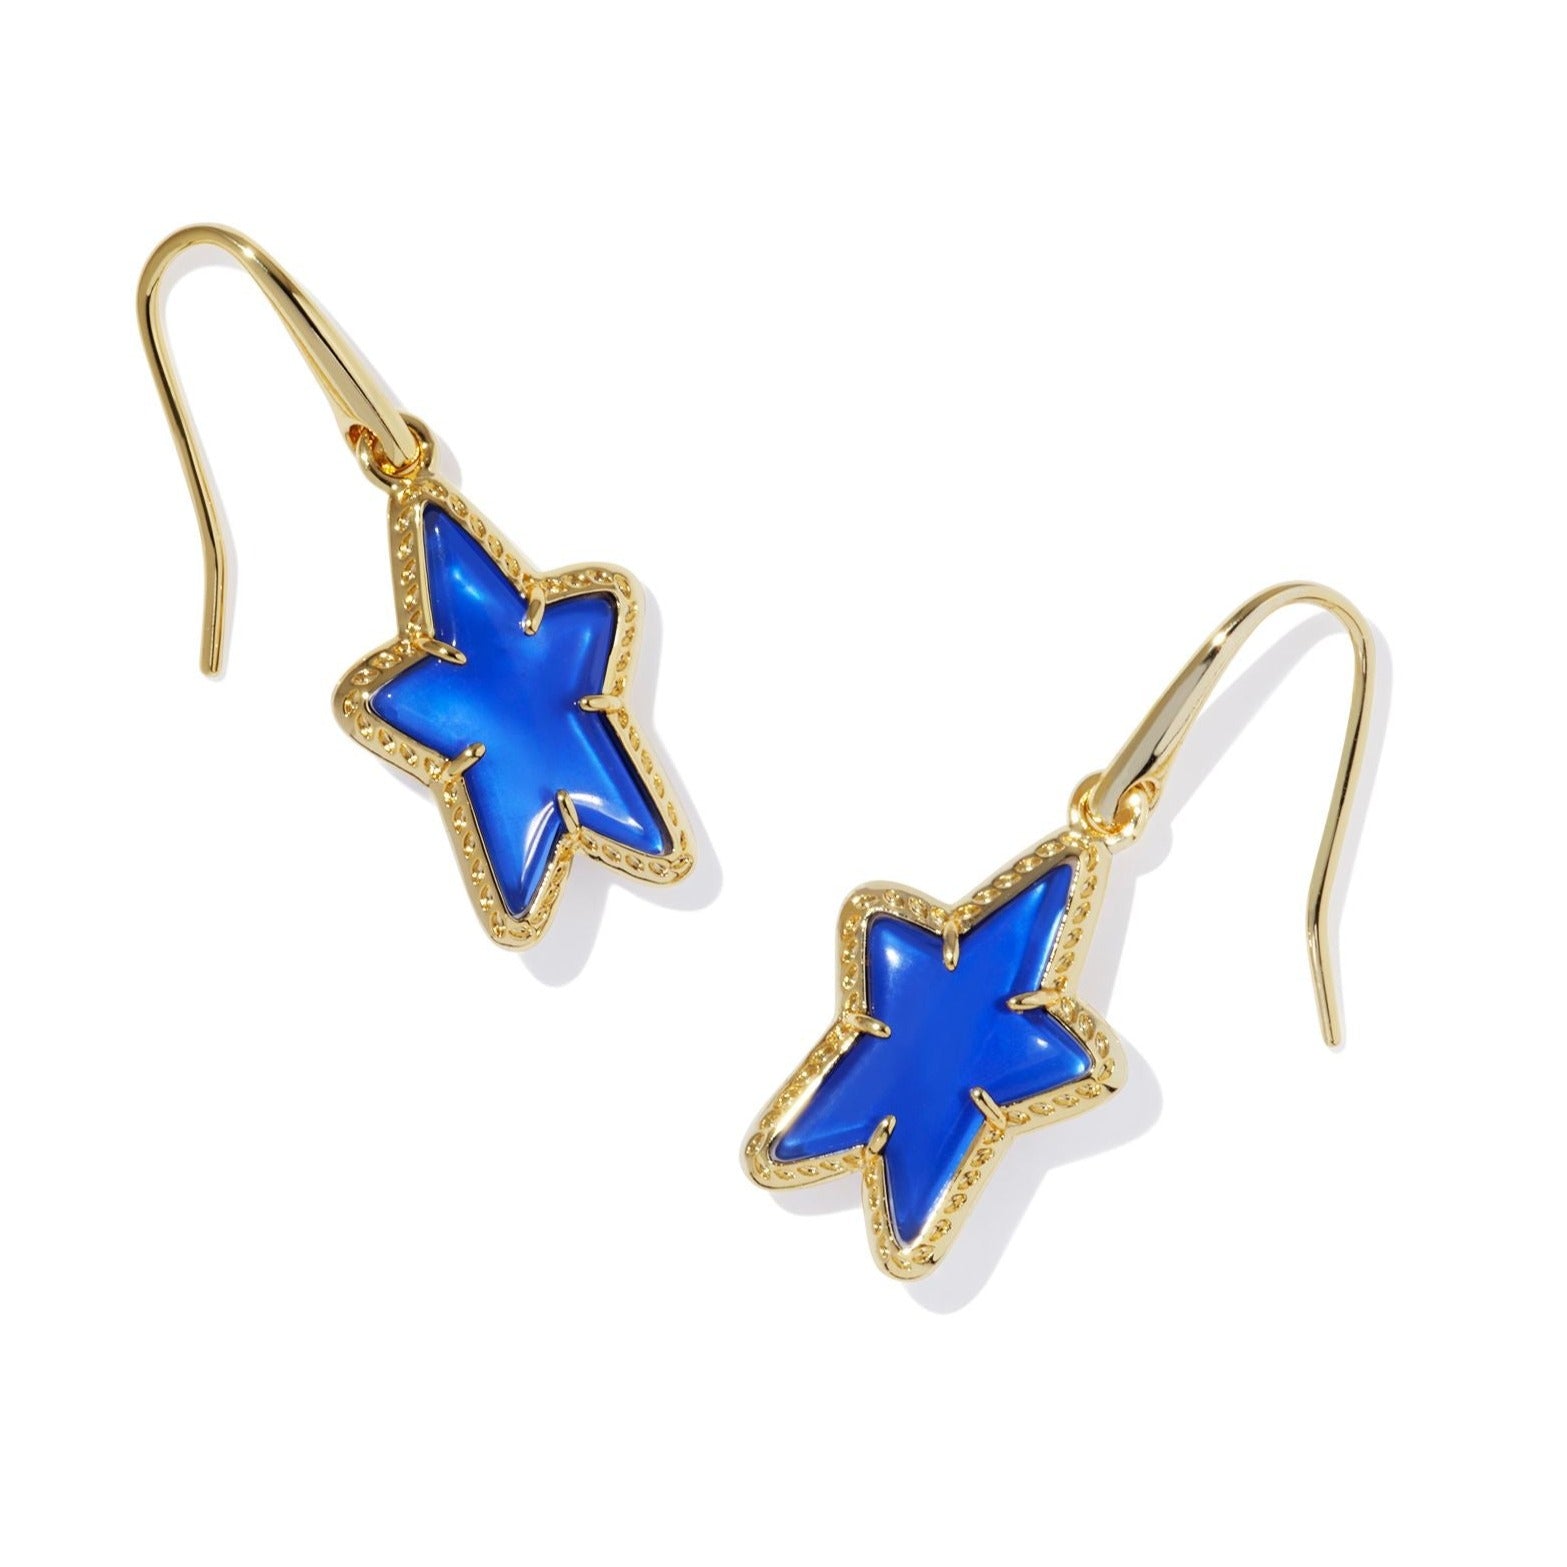 Kendra Scott | Ada Gold Small Star Drop Earrings in Cobalt Blue Illusion - Giddy Up Glamour Boutique